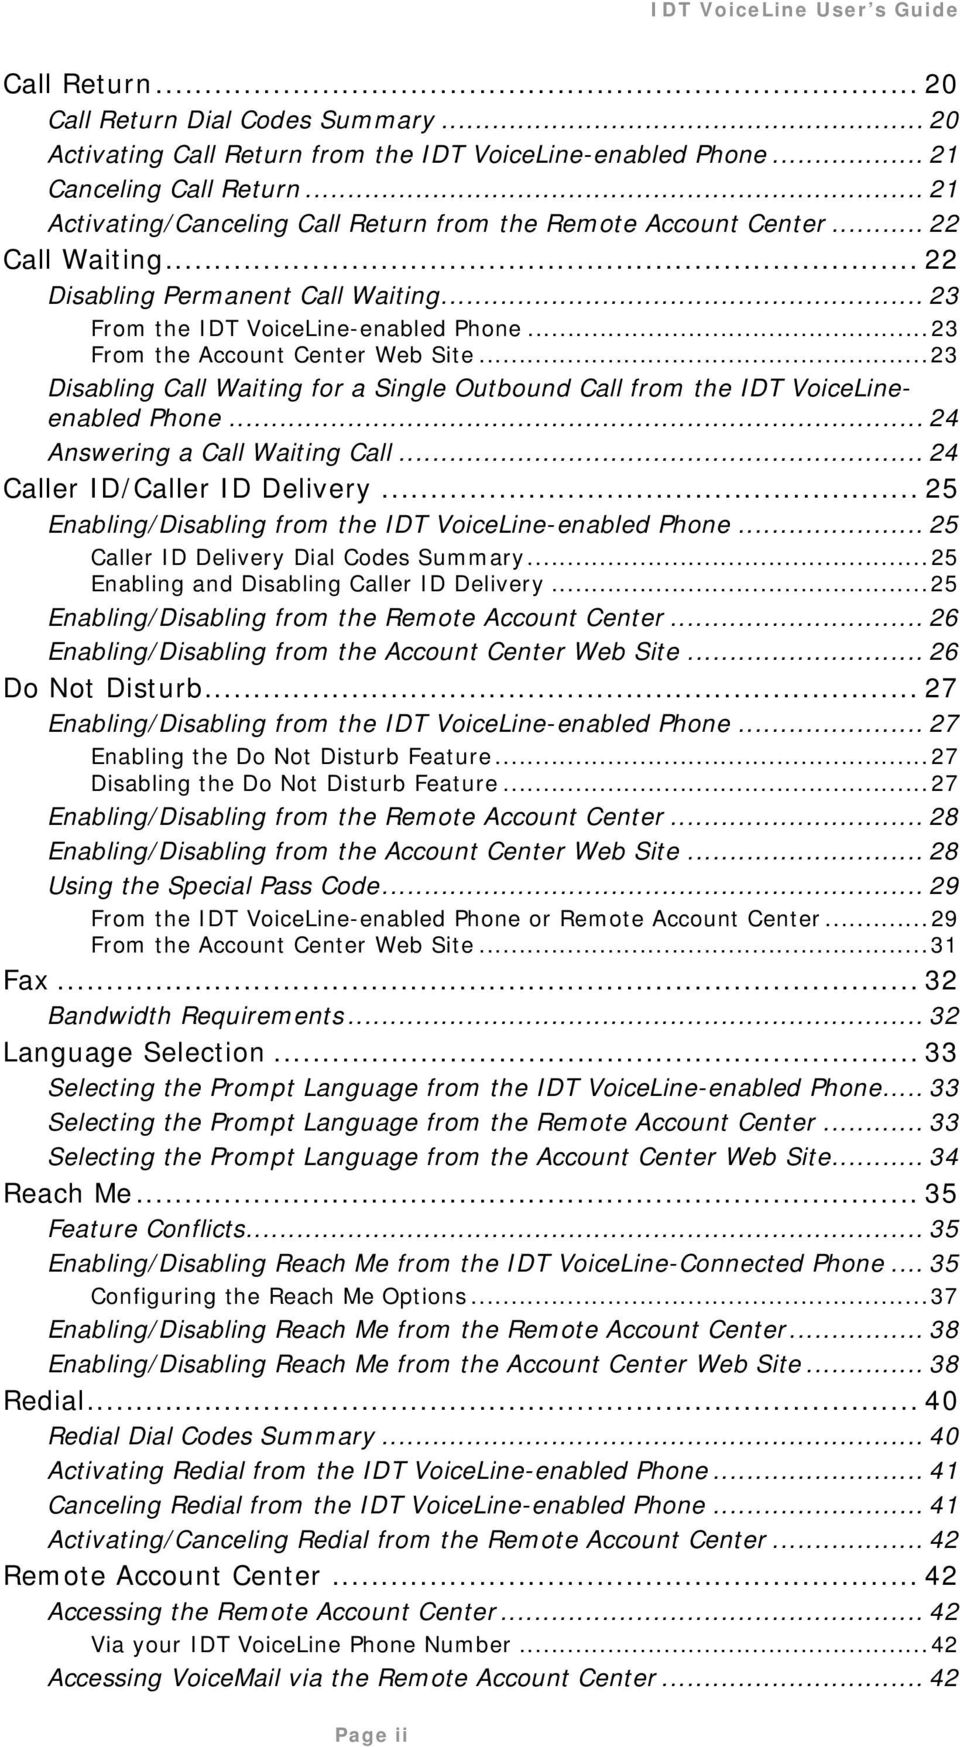 ..23 From the Account Center Web Site...23 Disabling Call Waiting for a Single Outbound Call from the IDT VoiceLineenabled Phone... 24 Answering a Call Waiting Call... 24 Caller ID/Caller ID Delivery.